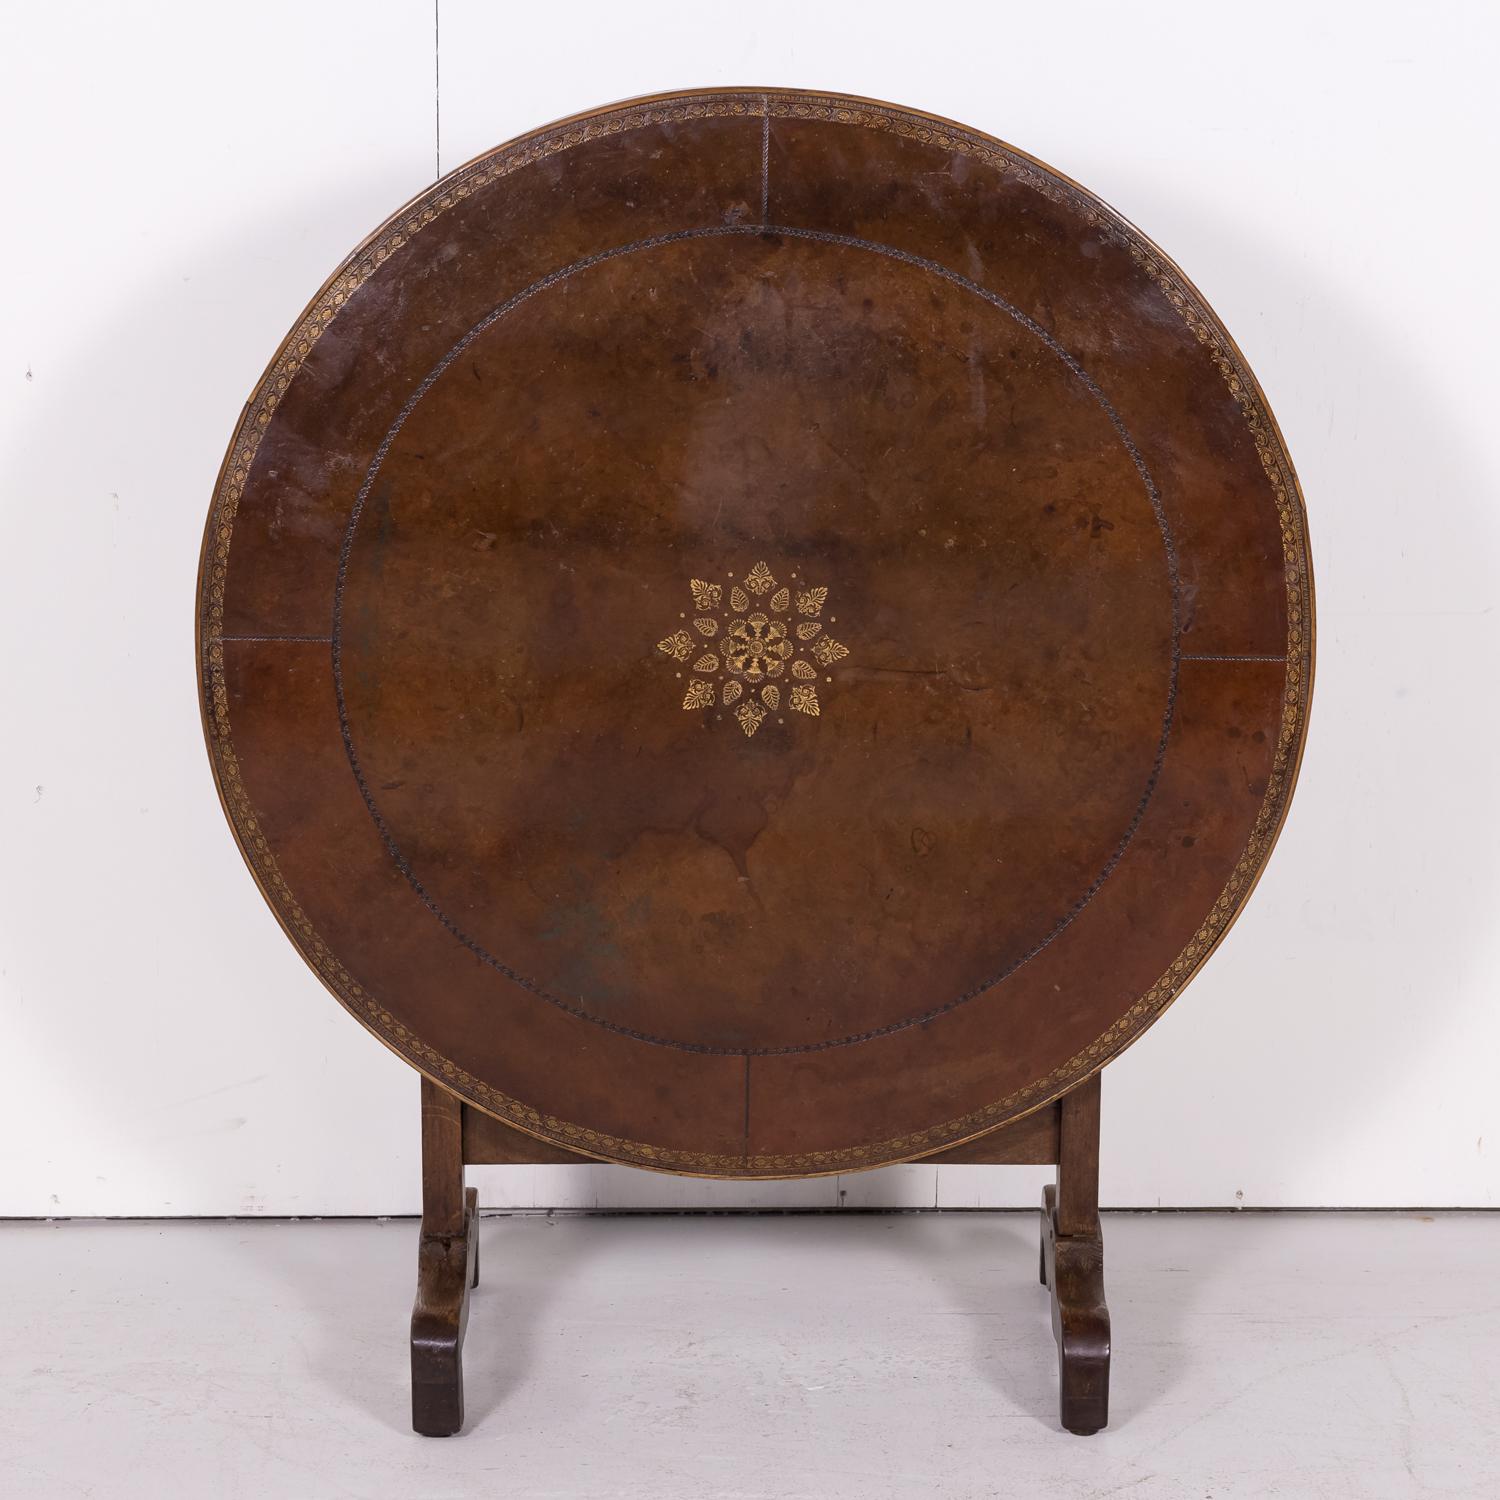 Gilt Rare 19th Century French Charles X Period Tilt-Top Wine Tasting or Vendage Table